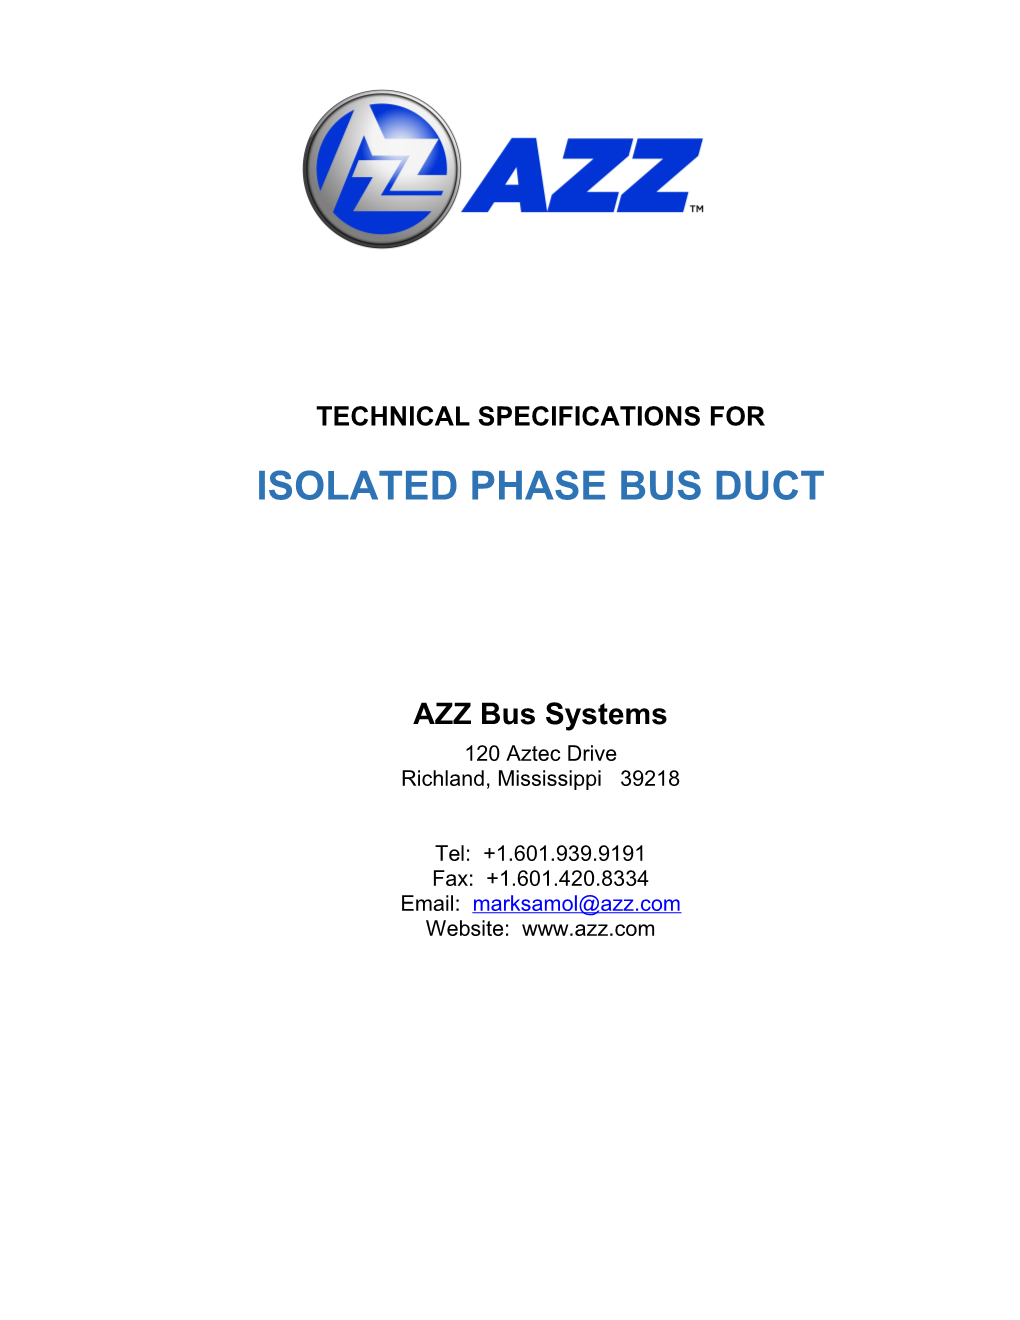 Isolated Phase Bus Duct